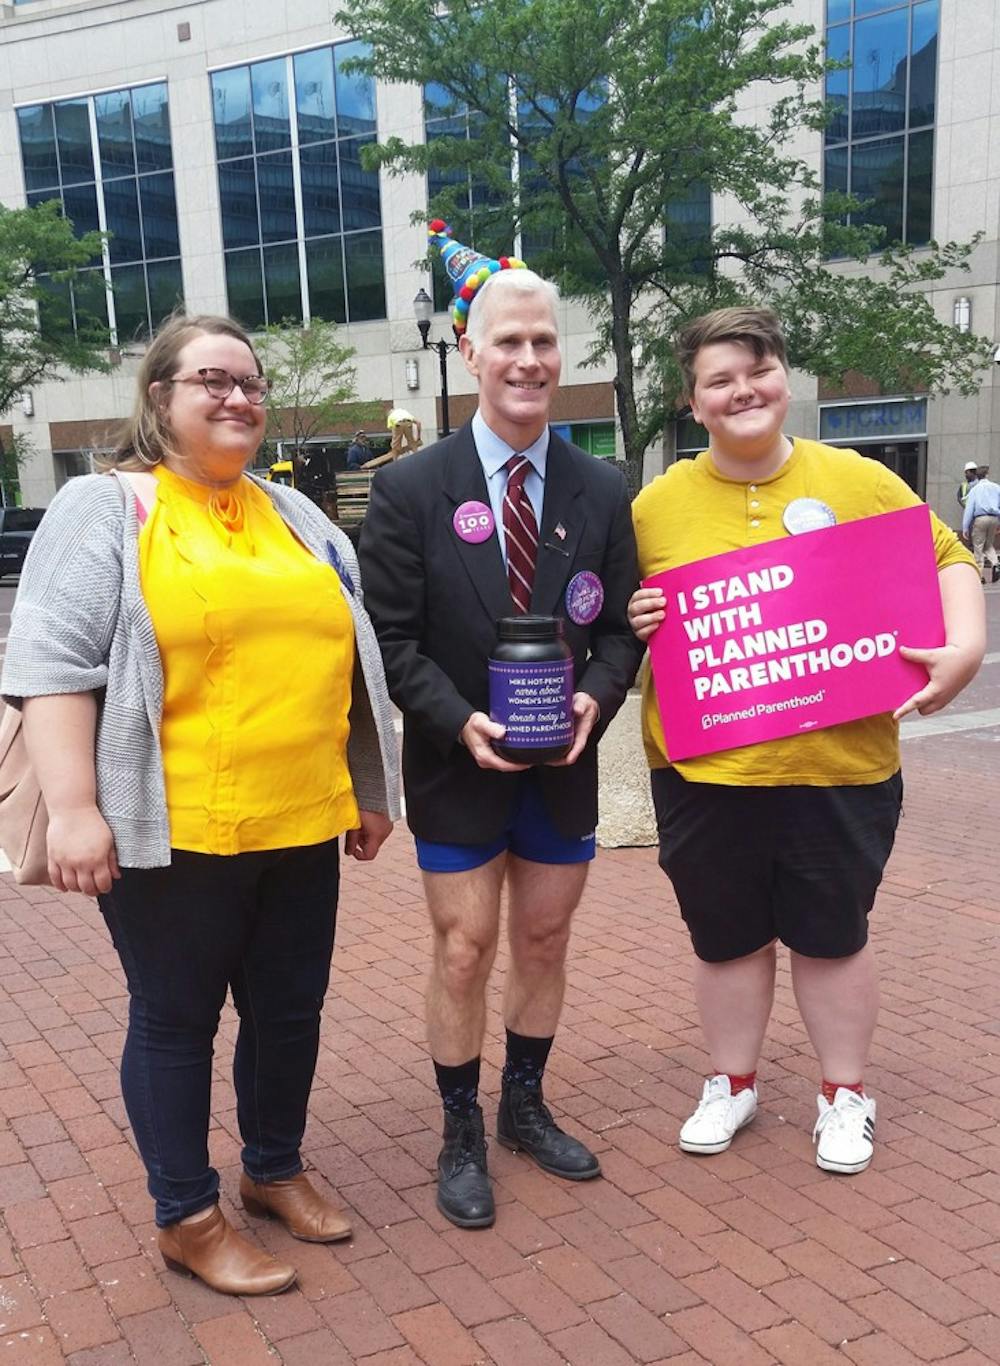 Mike Hot-Pence, a Mike Pence impersonator, stands with Planned Parenthood supporters on Monument Circle in Indianapolis. Hot-Pence raised $1,500 for the organization at an event June 7. 